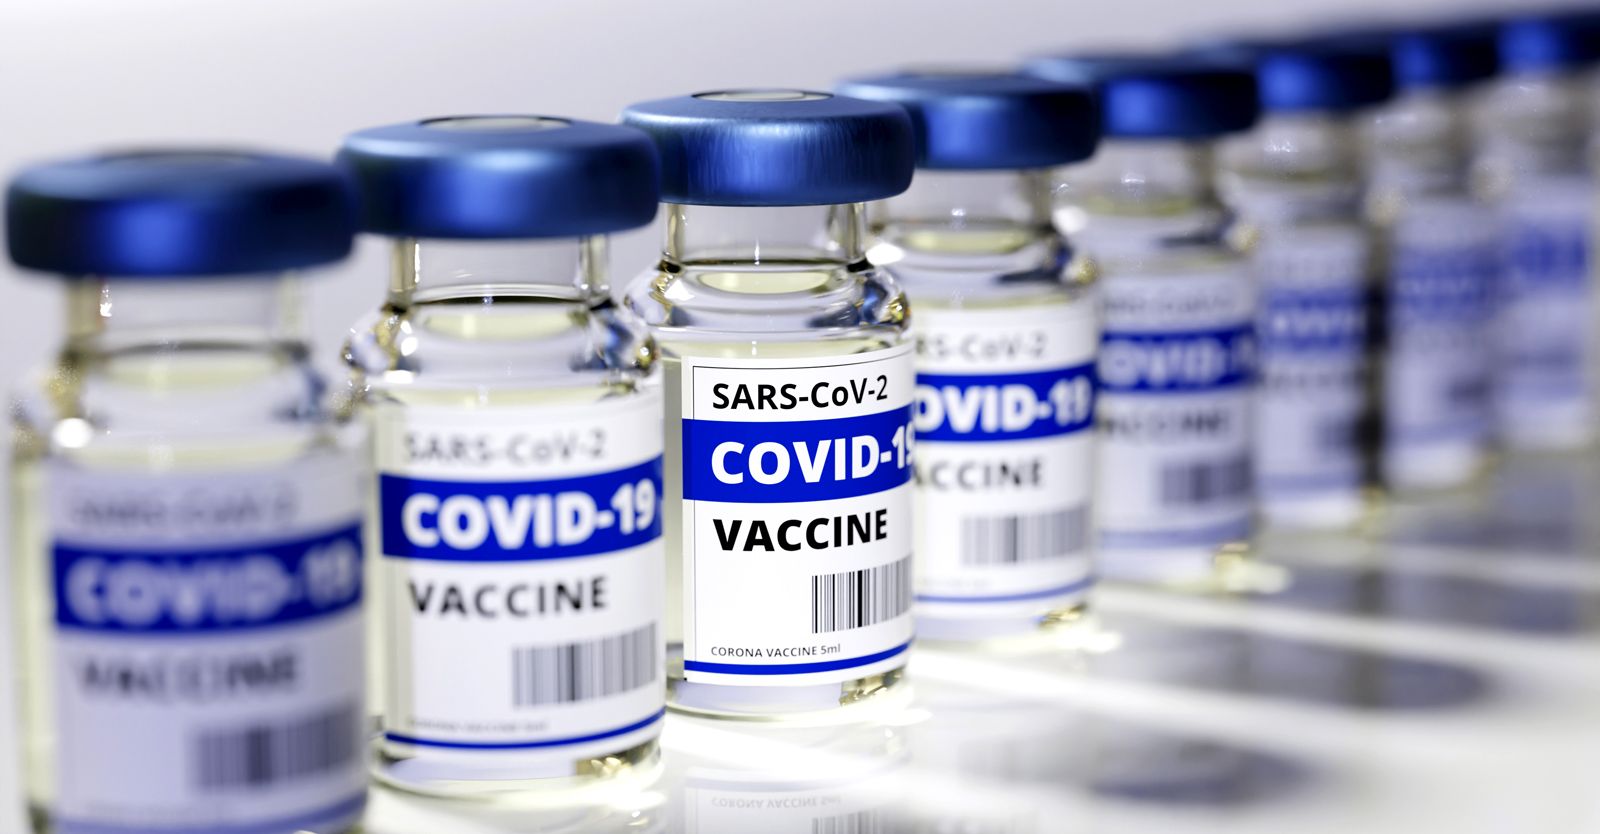 100,000 excess deaths per month happening right now in the USA due to covid vaccines